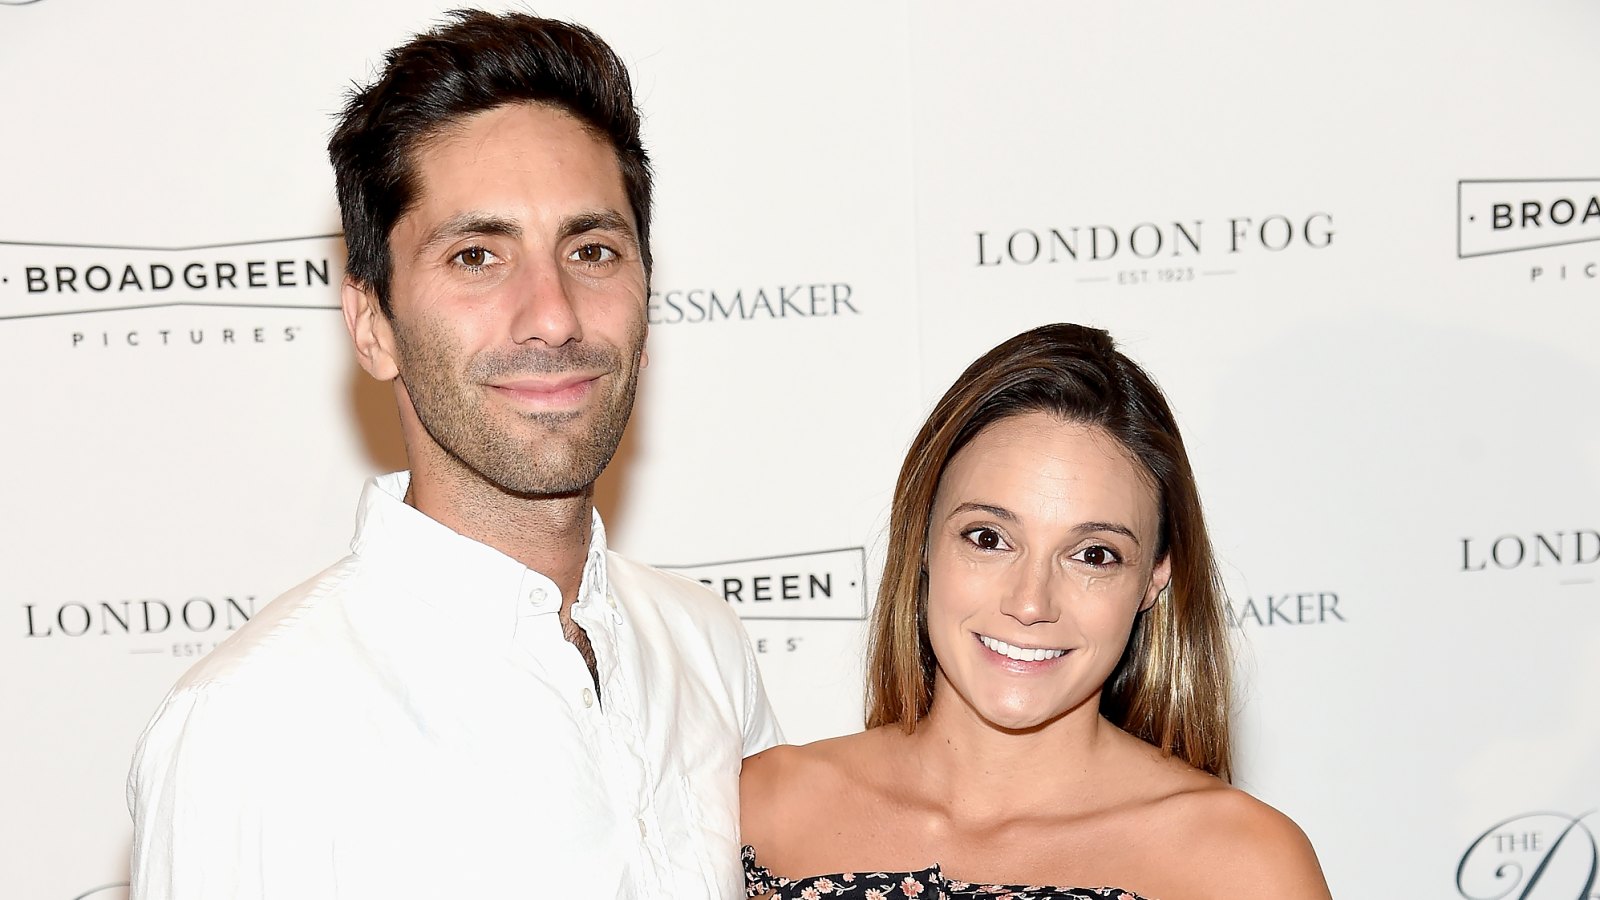 Nev Schulman and Laura Perlongo attend "The Dressmaker" New York Screening at Florence Gould Hall Theater on September 16, 2016 in New York City.